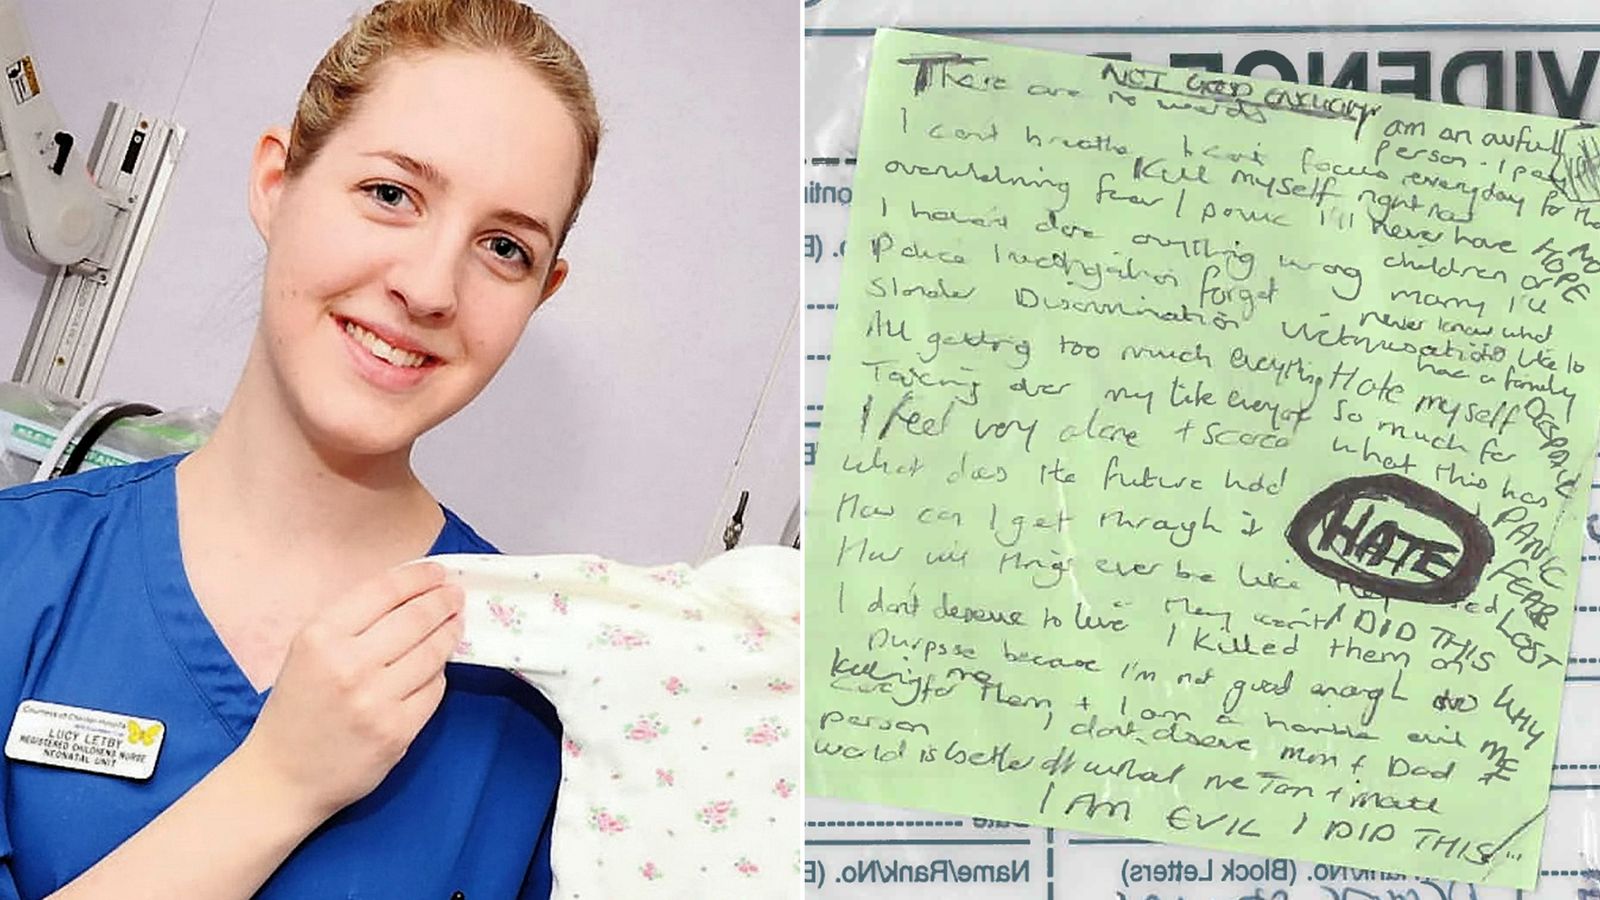 Lucy Letby trial - 'I am evil, I did this': Read the 'confession note' written by nurse accused of murdering seven babies